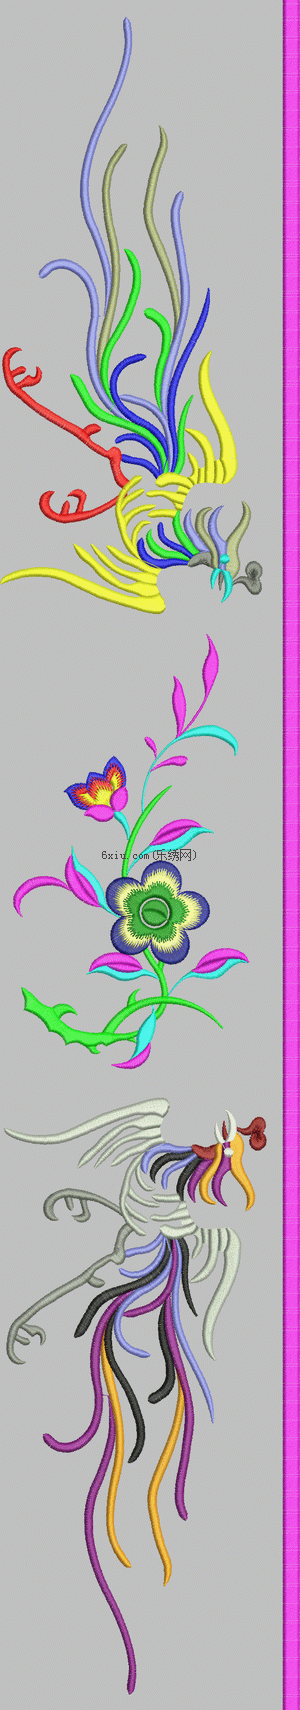 Phoenix in China embroidery pattern album